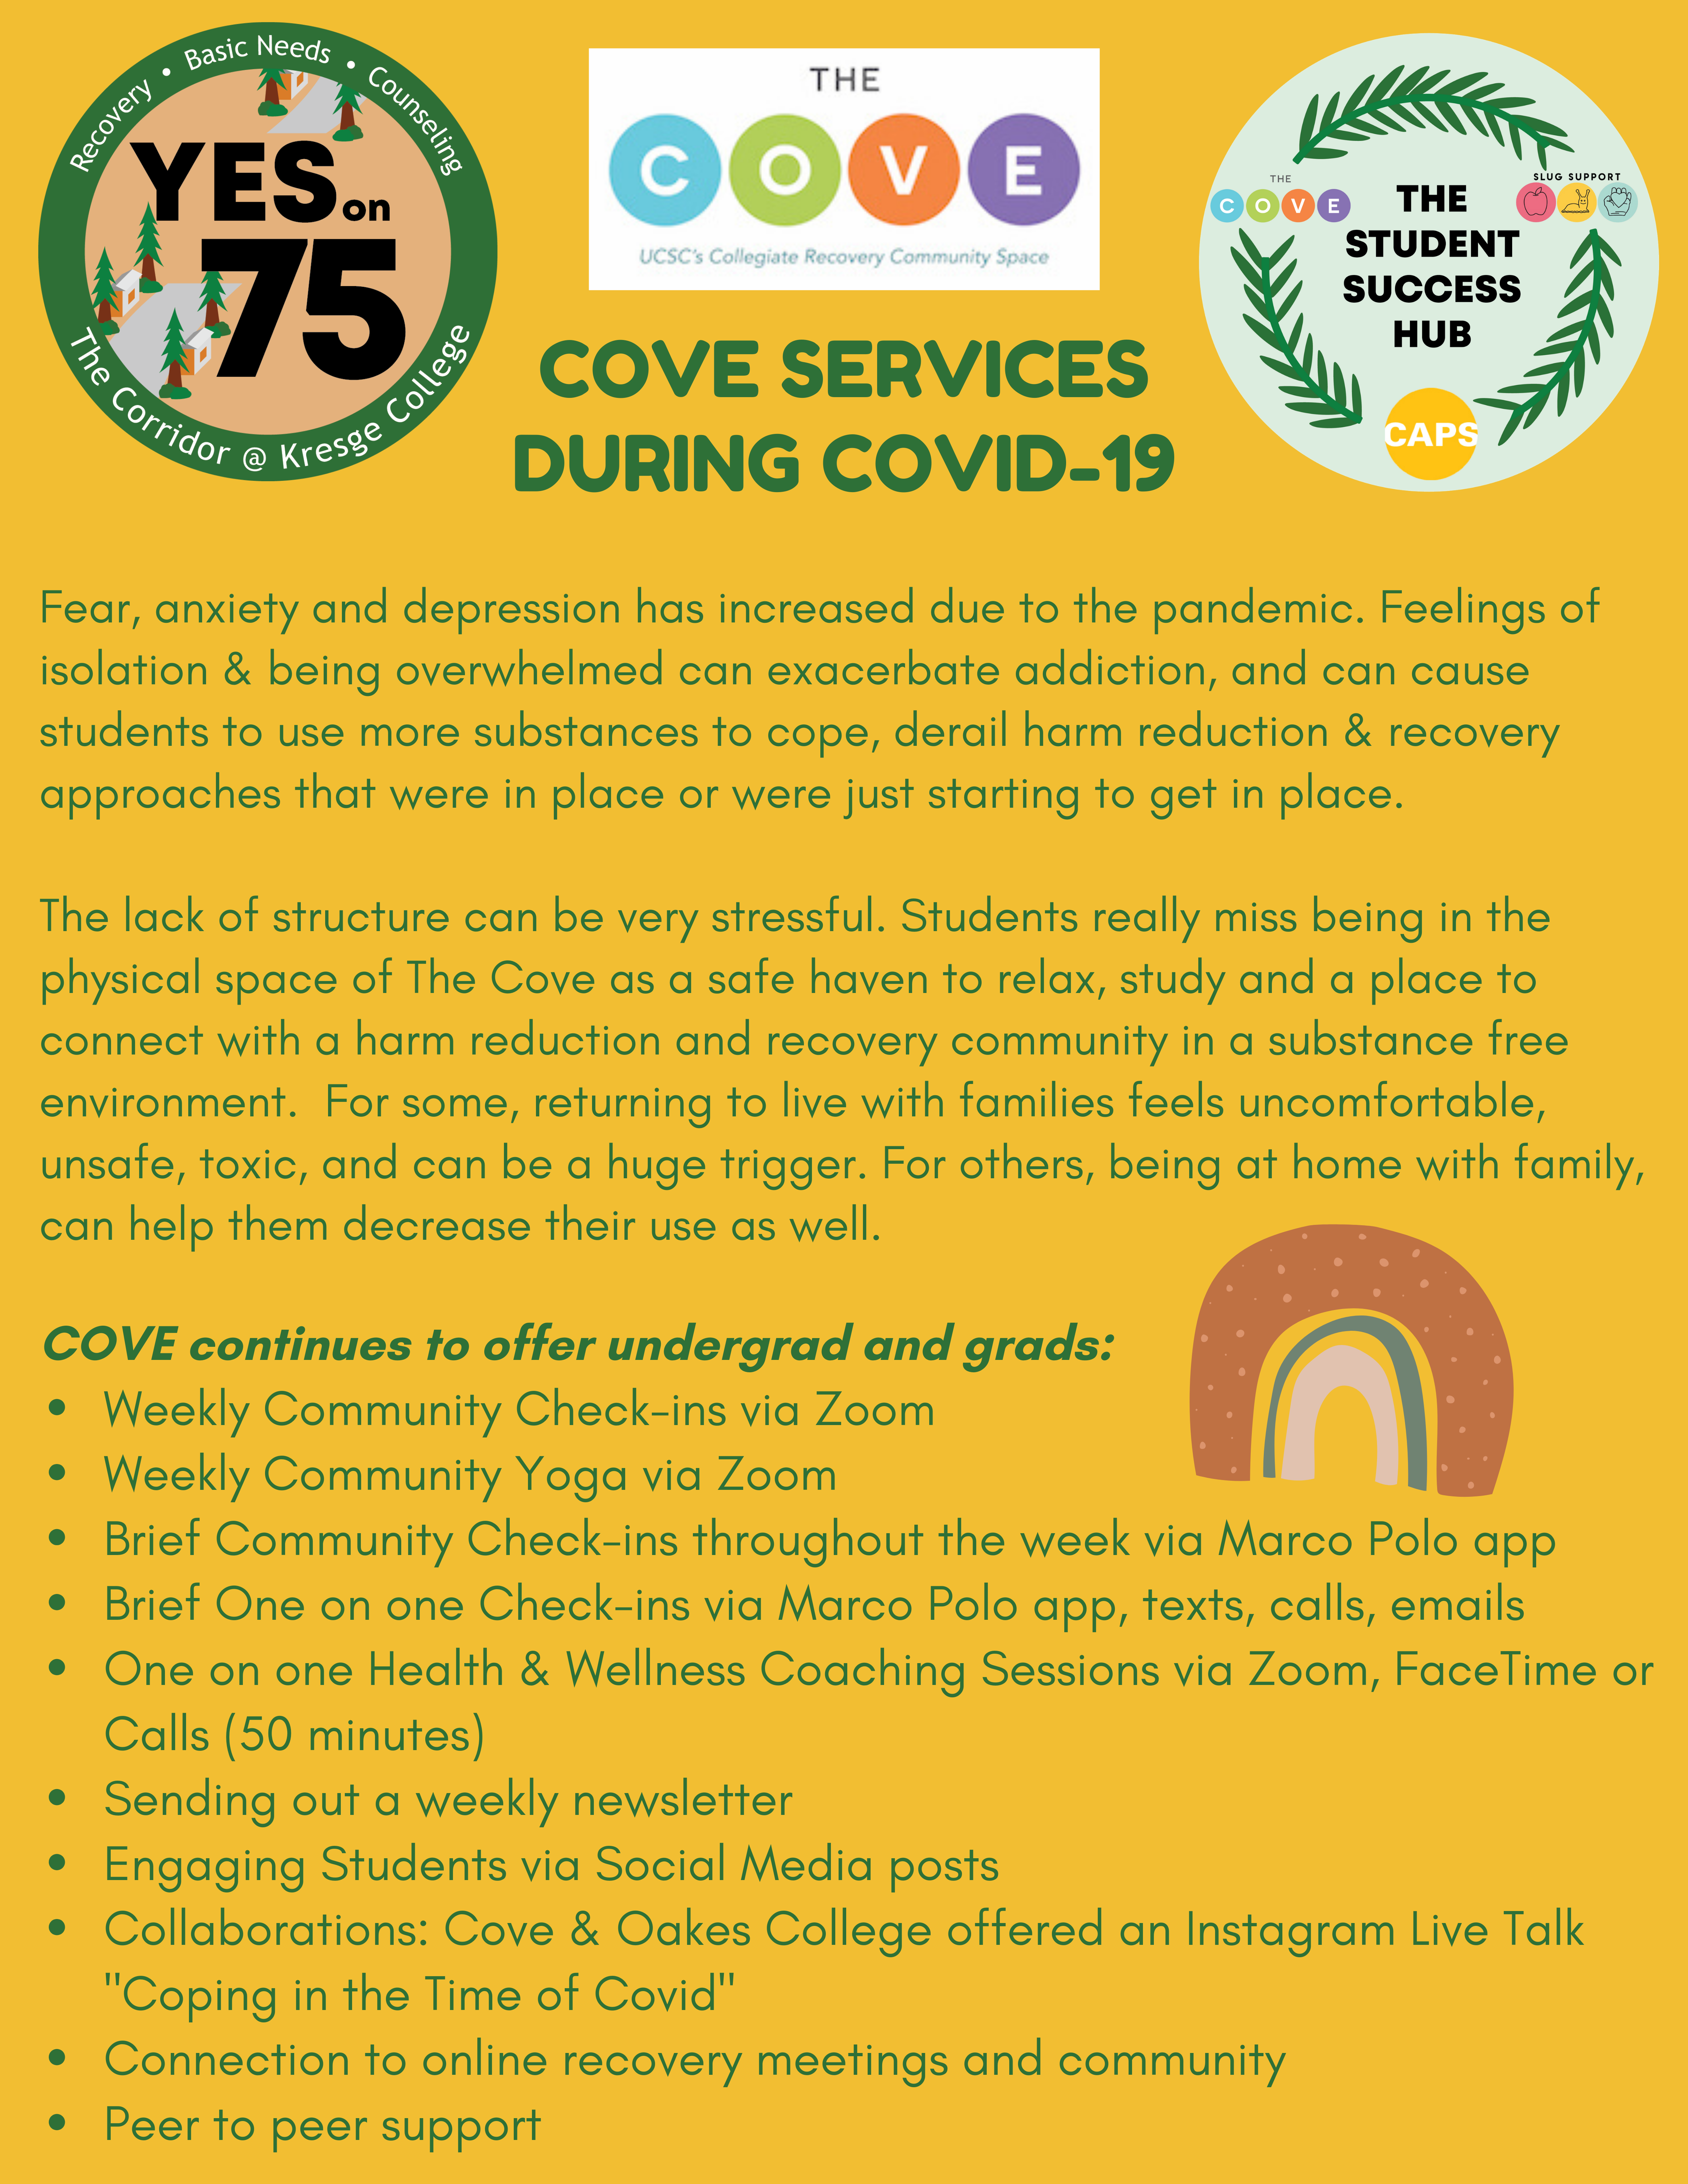 cove-services-during-covid-19.png